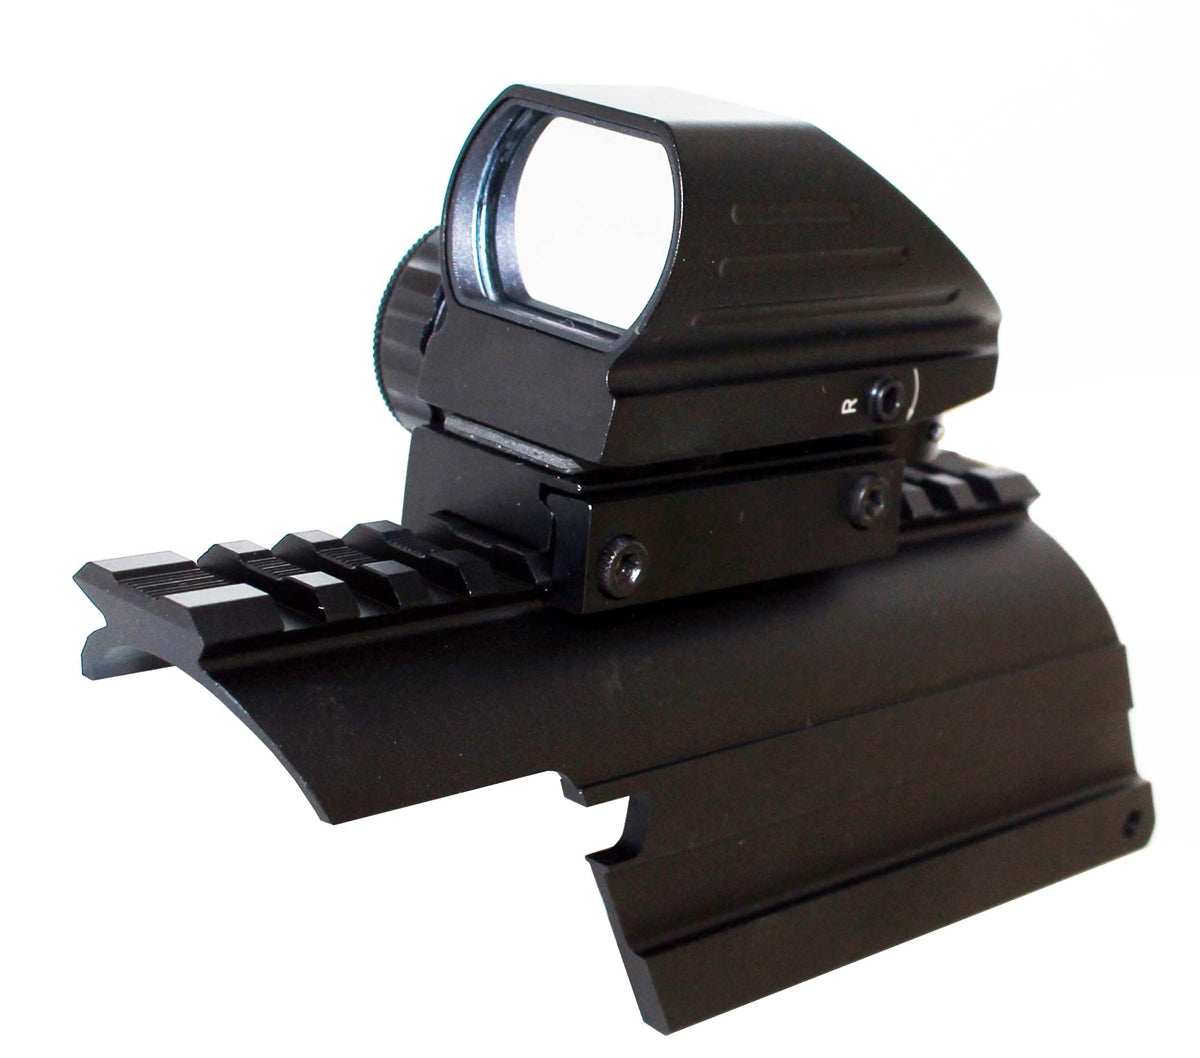 Trinity Reflex Sight Red Green Reticles With Saddle Mount Picatinny Rail Adapter Compatible With Mossberg 500 12 Gauge.